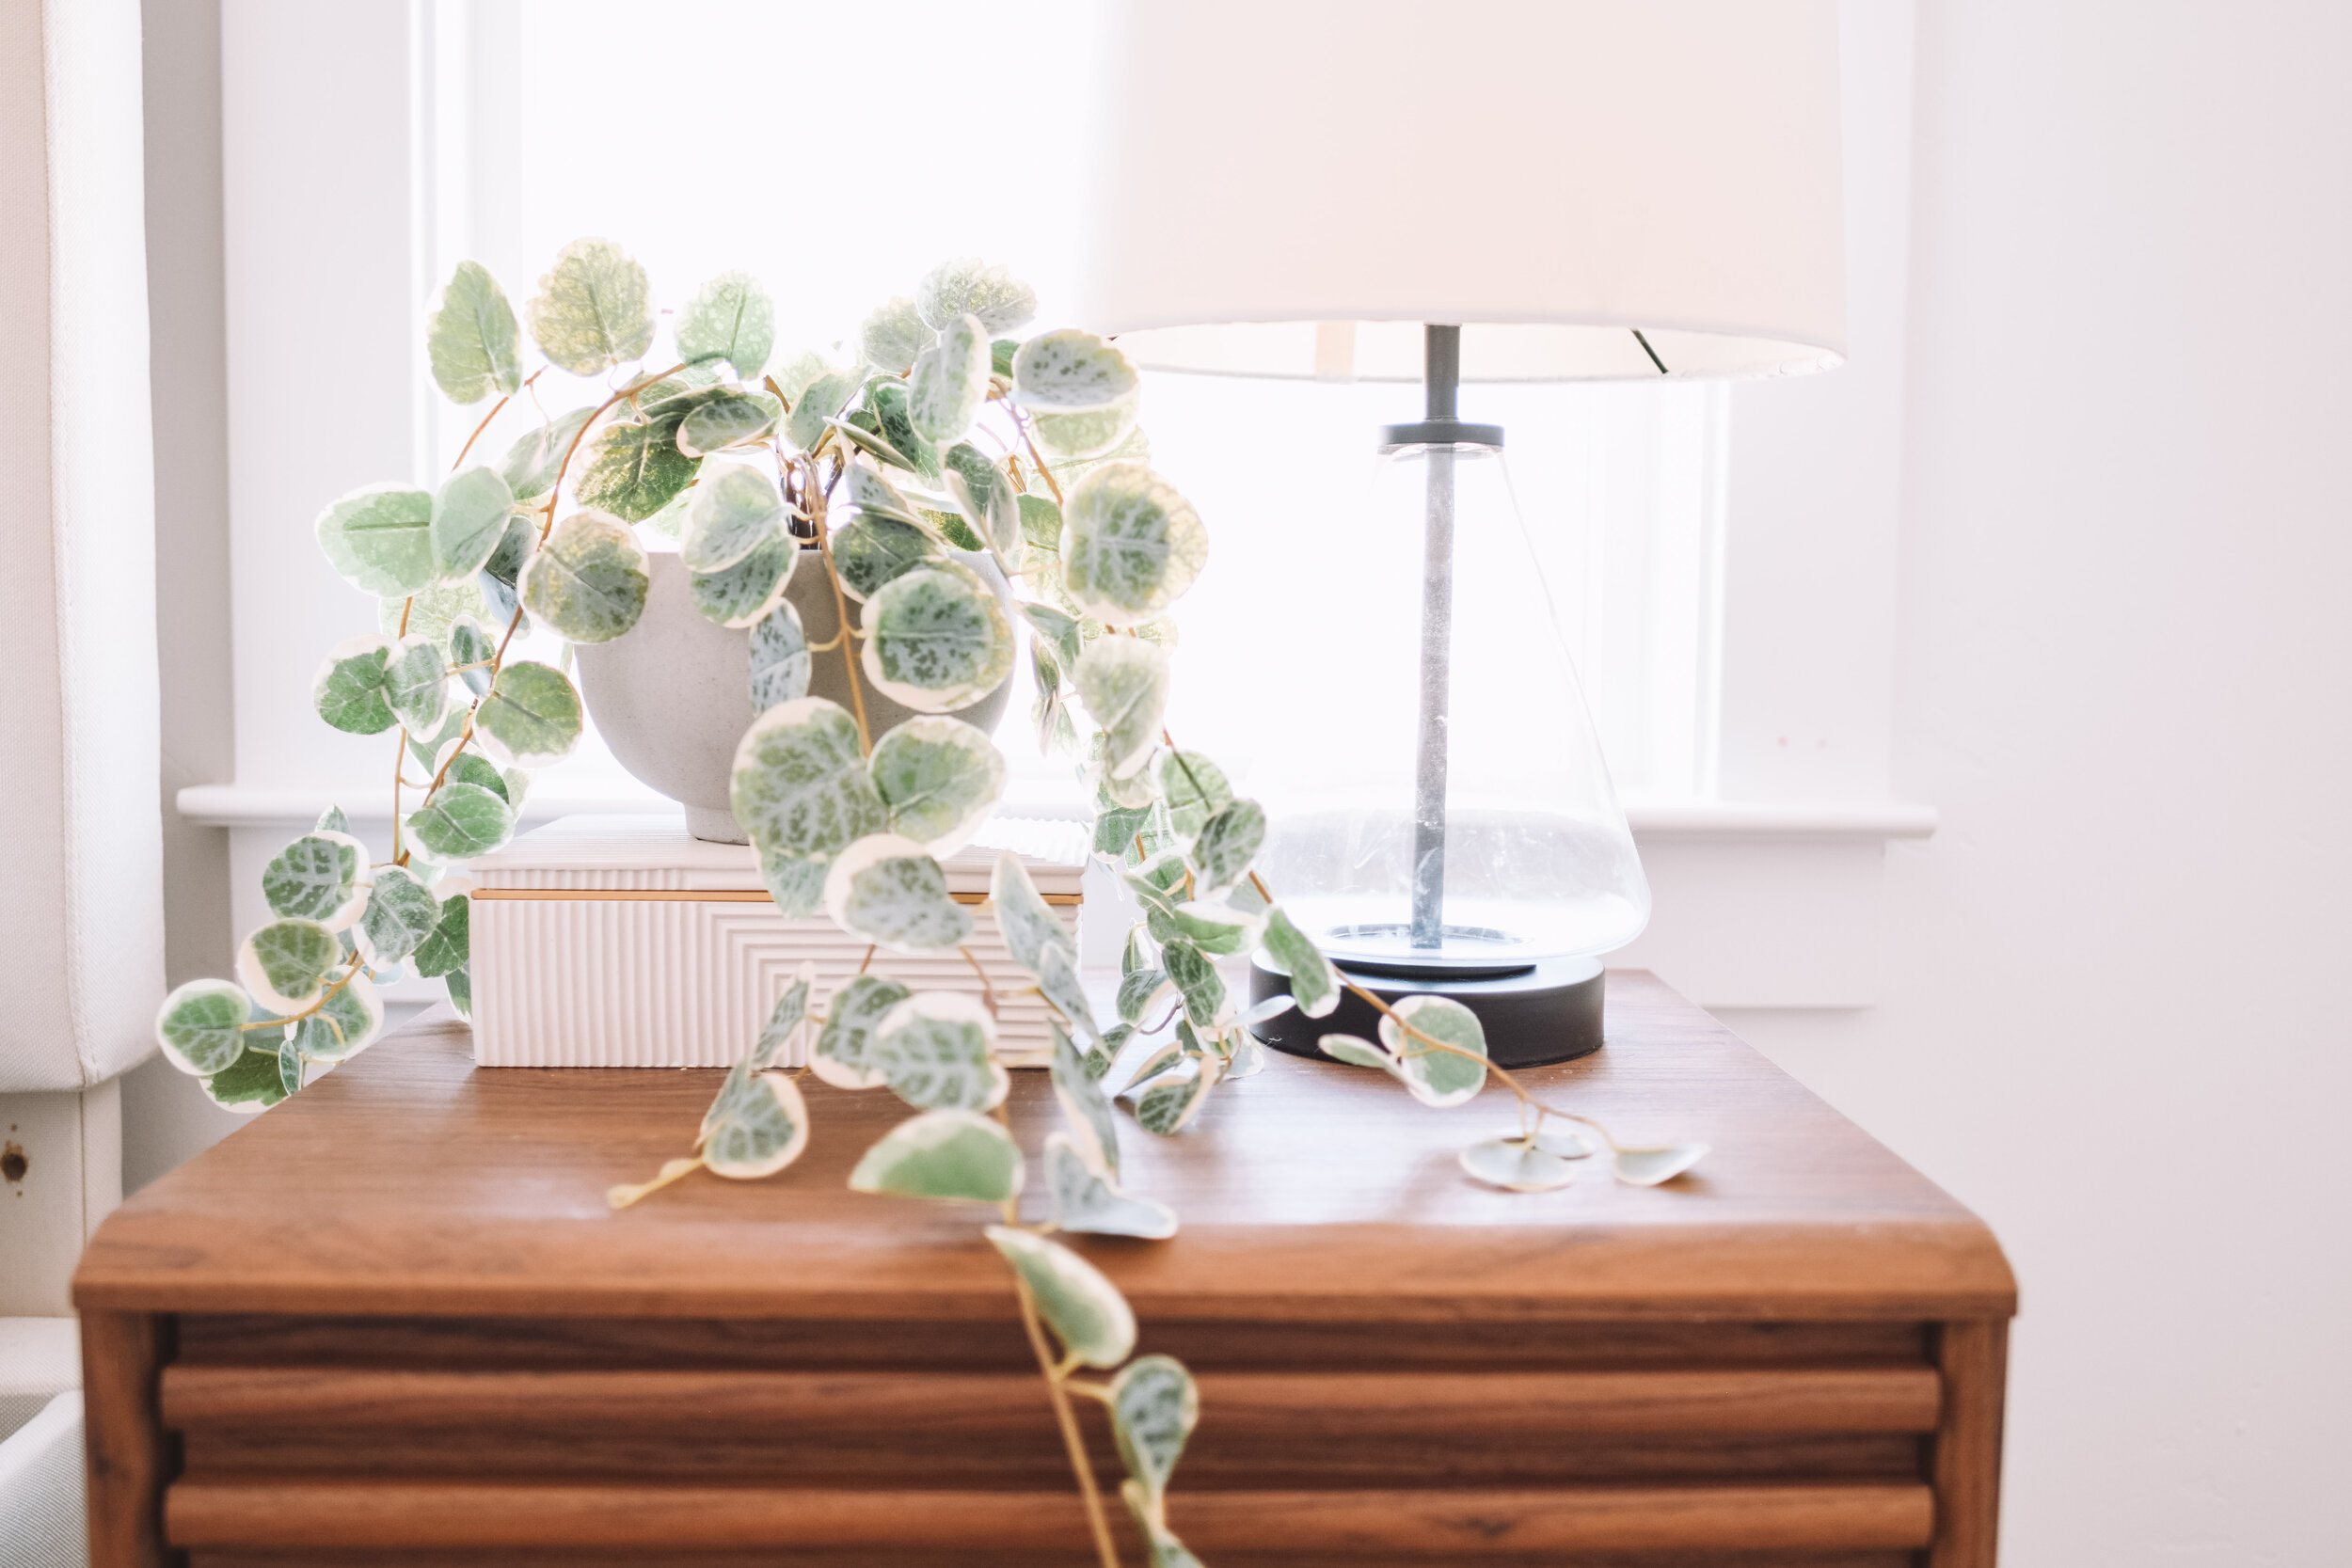 Nightstand Decor - Faux Eucalyptus Plant - The Overwhelmed Mommy